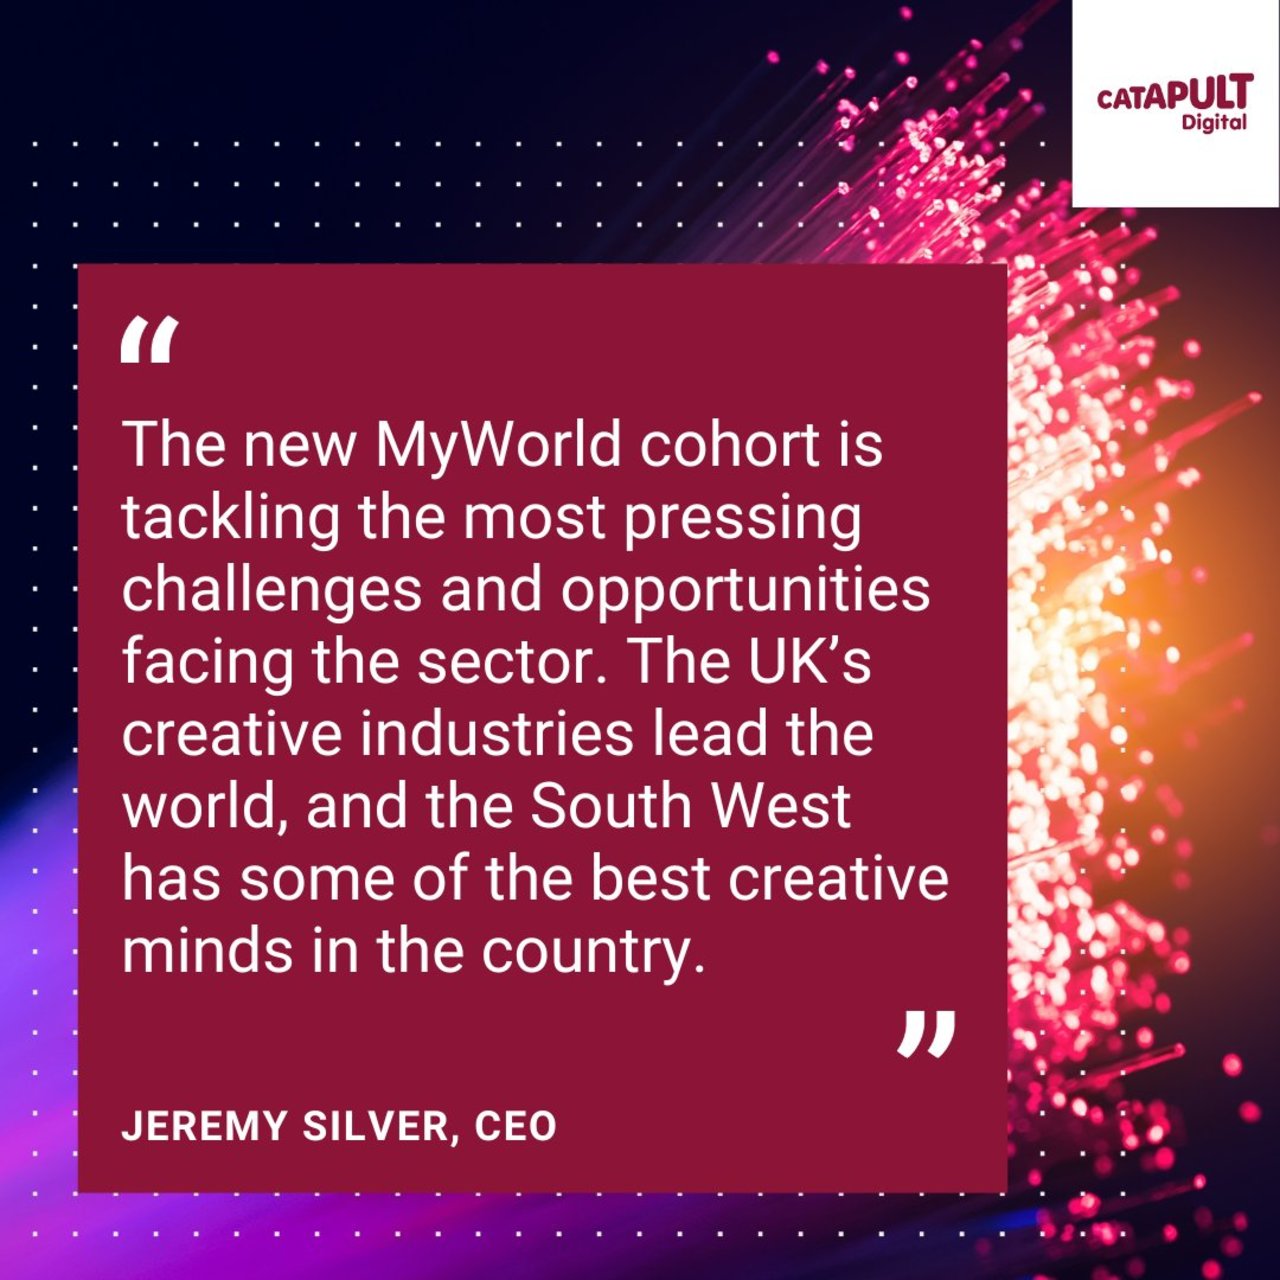  Calling all #creative innovators in the West of England! Discover how Digital Catapult & @BristolUni's @MyWorldCreates project is fostering #innovation for screen-based media  https://ow.ly/6hYc50P69rB https://t.co/QBsvlySHua